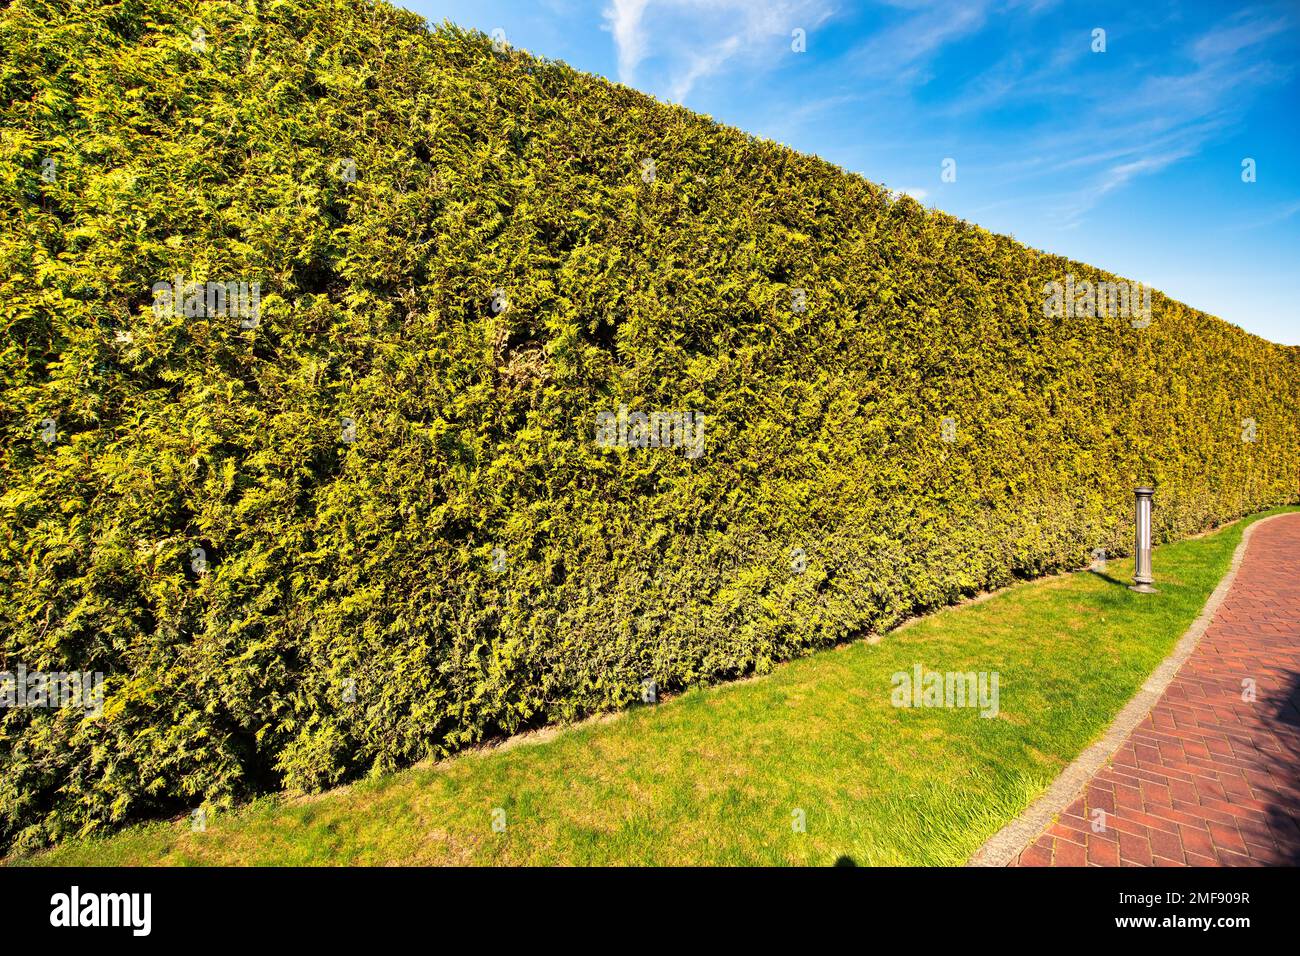 Thuja hedge. The use of evergreen plants in landscape design. A wonderful warm autumn day. Stock Photo